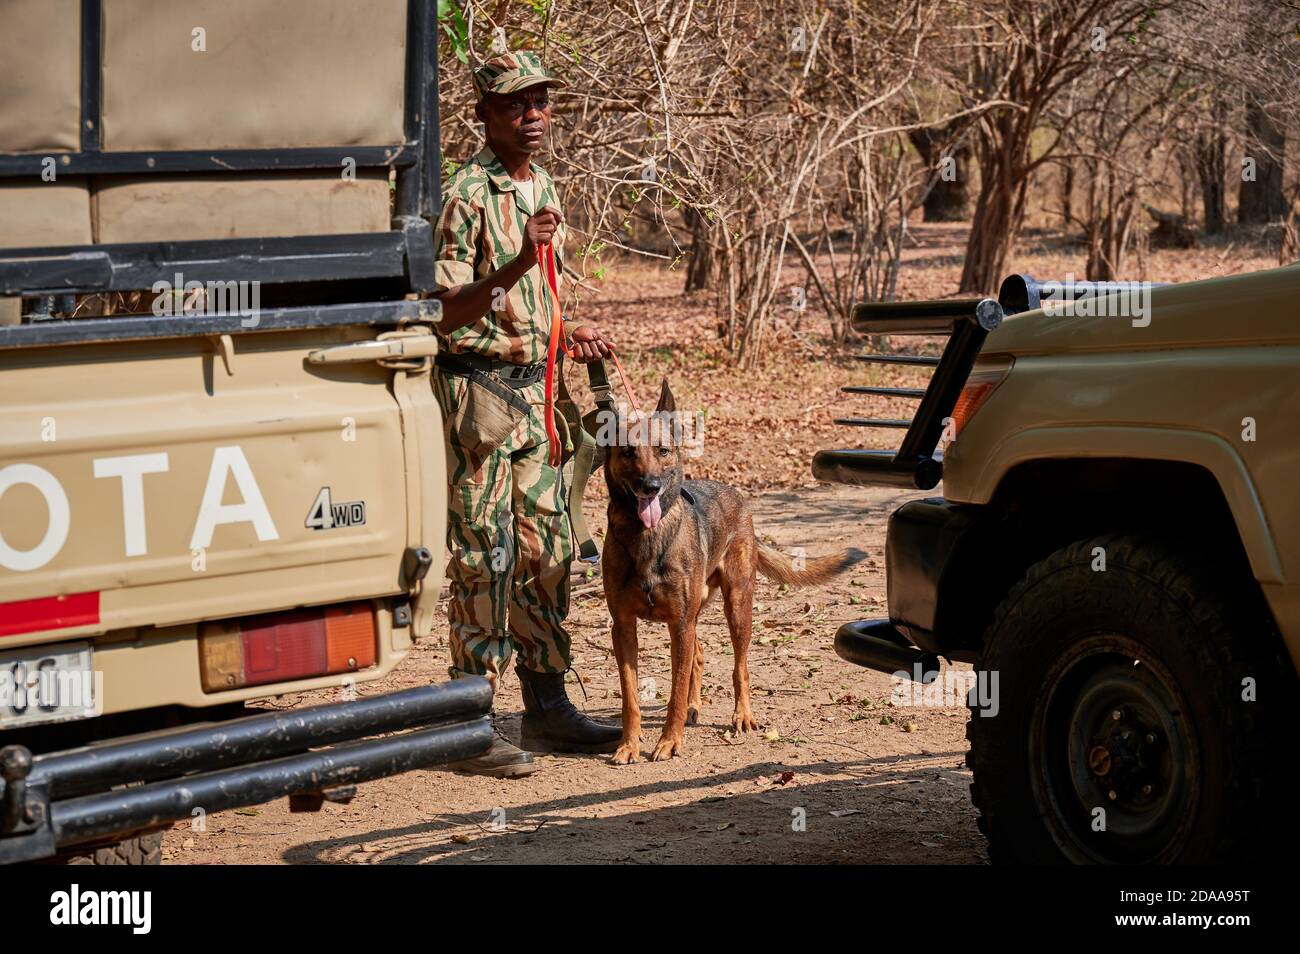 Demonstration of Conservation South Luangwa with anti-poaching dogs, K9 Detection Dogs Unit, South Luangwa National Park, Mfuwe, Zambia, Africa Stock Photo